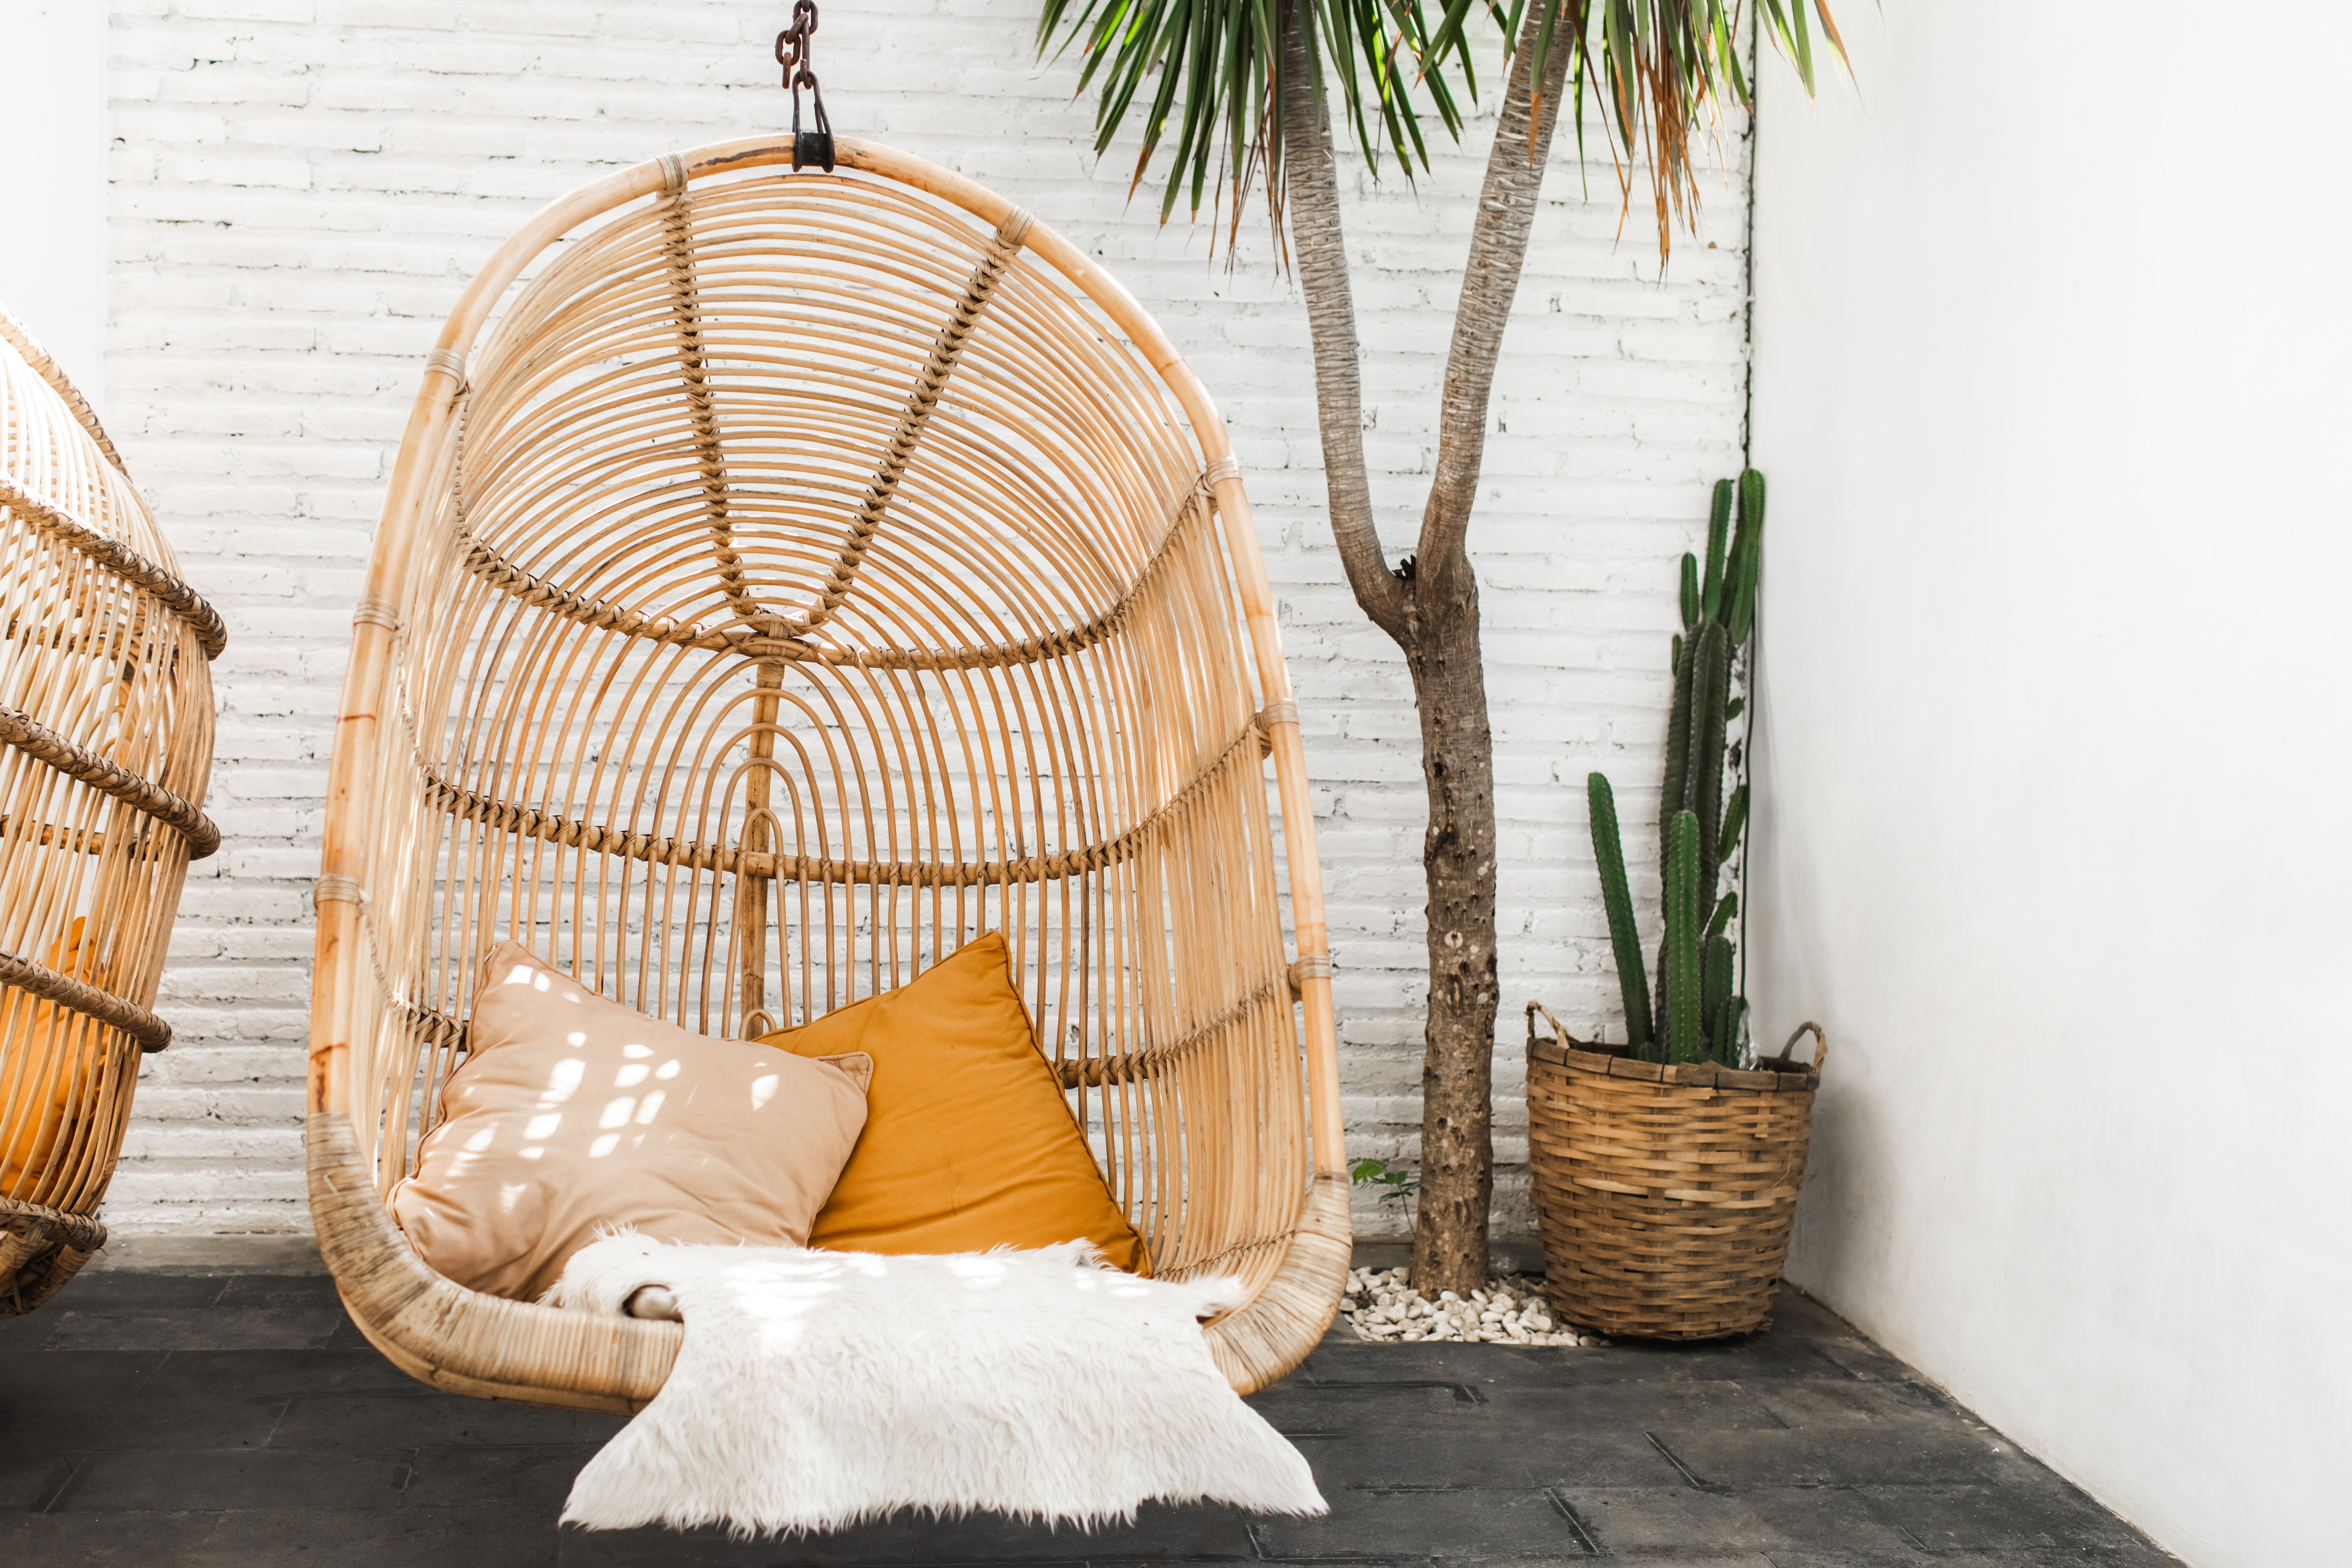 https://storables.com/wp-content/uploads/2021/06/Wicker-rattan-hanging-chair-in-loft-cafe.-Eco-friendly-furniture-style-and-concept.-Orange-pillows-and-soft-fur-on-chair..jpeg